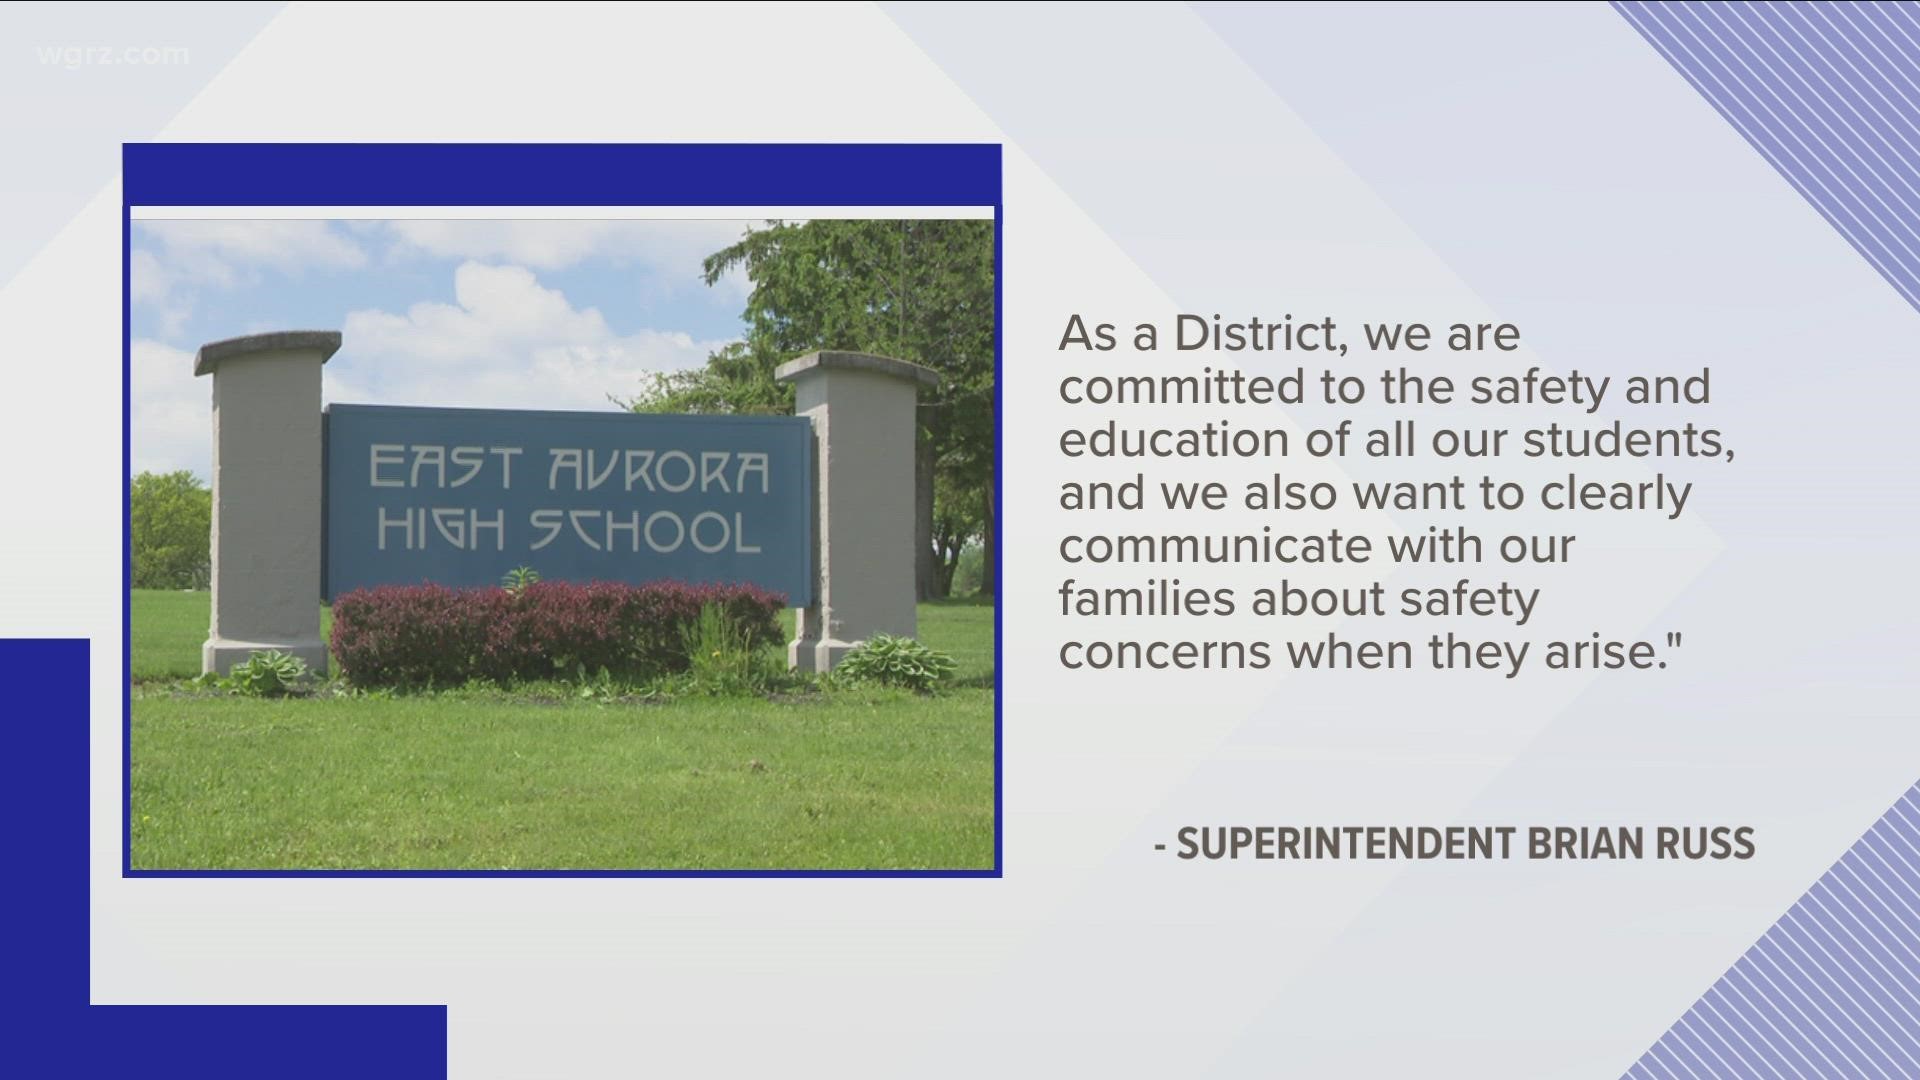 THE EAST AURORA UNION FREE SCHOOL DISTRICT IS CANCELING CLASSES today AFTER A STUDENT MADE A THREATENING STATEMENT.